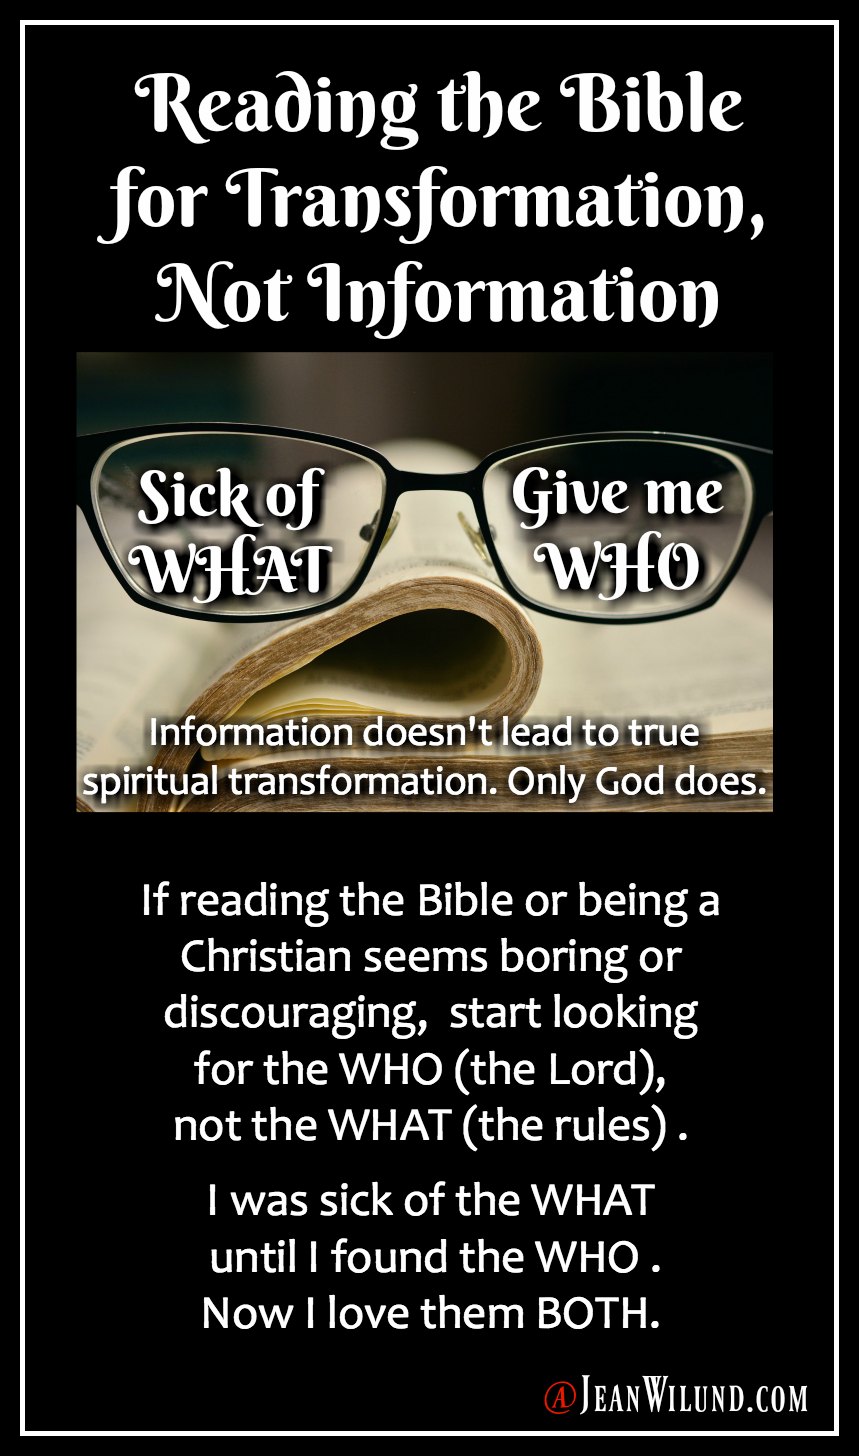 Reading the Bible seem boring or discouraging? Start looking for the WHO (the Lord), not the WHAT (the rules). I was sick of the WHAT until I found the WHO. Reading the Bible for Transformation, Not Information via www.jeanwilund.com